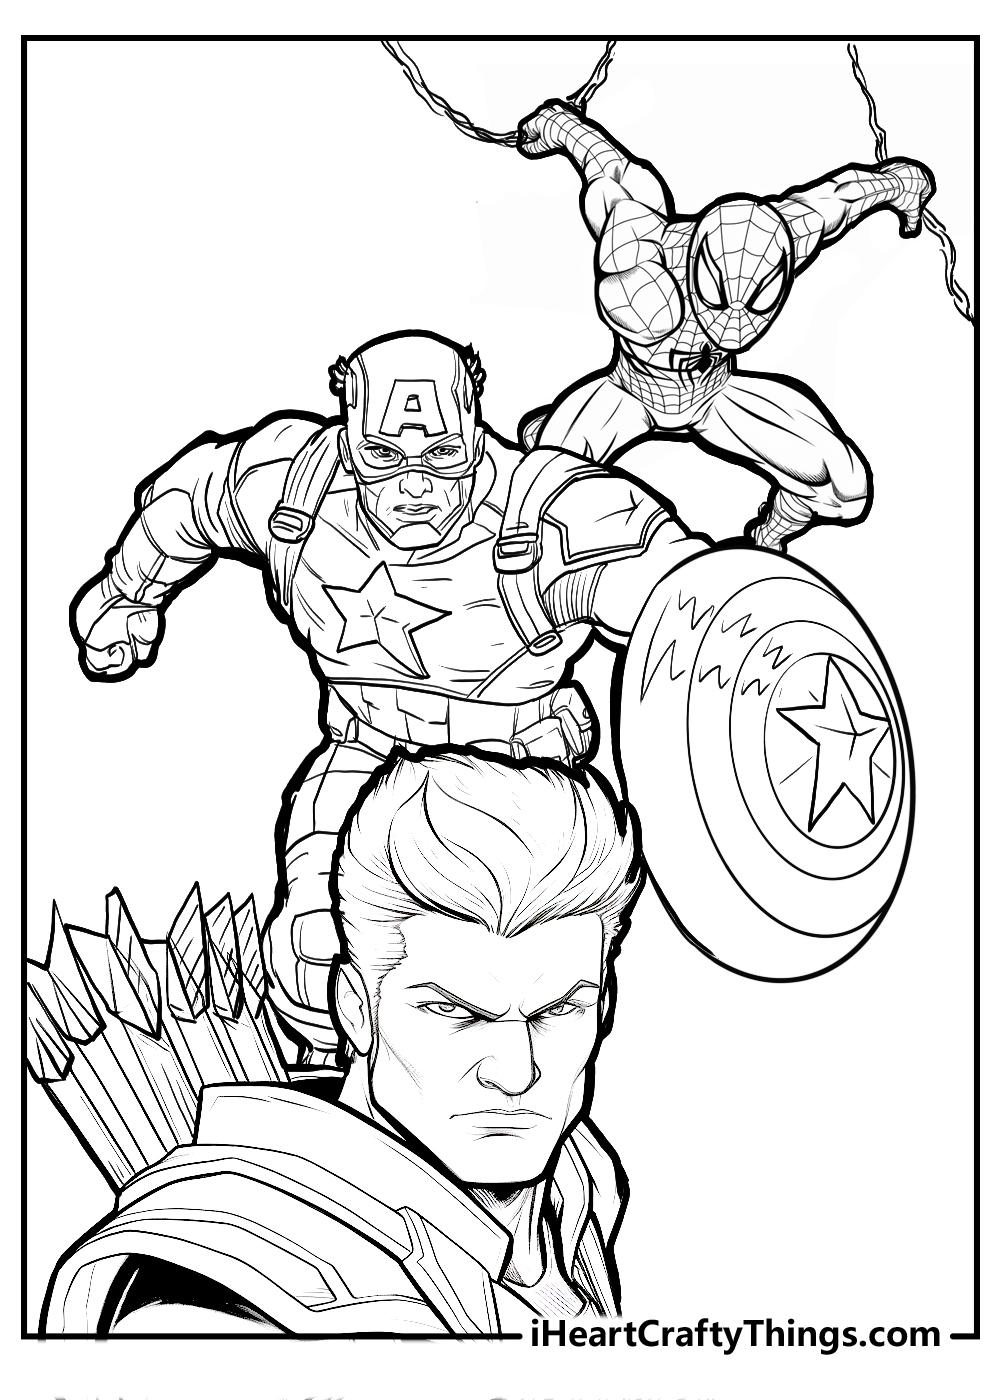 Avengers coloring pages free download